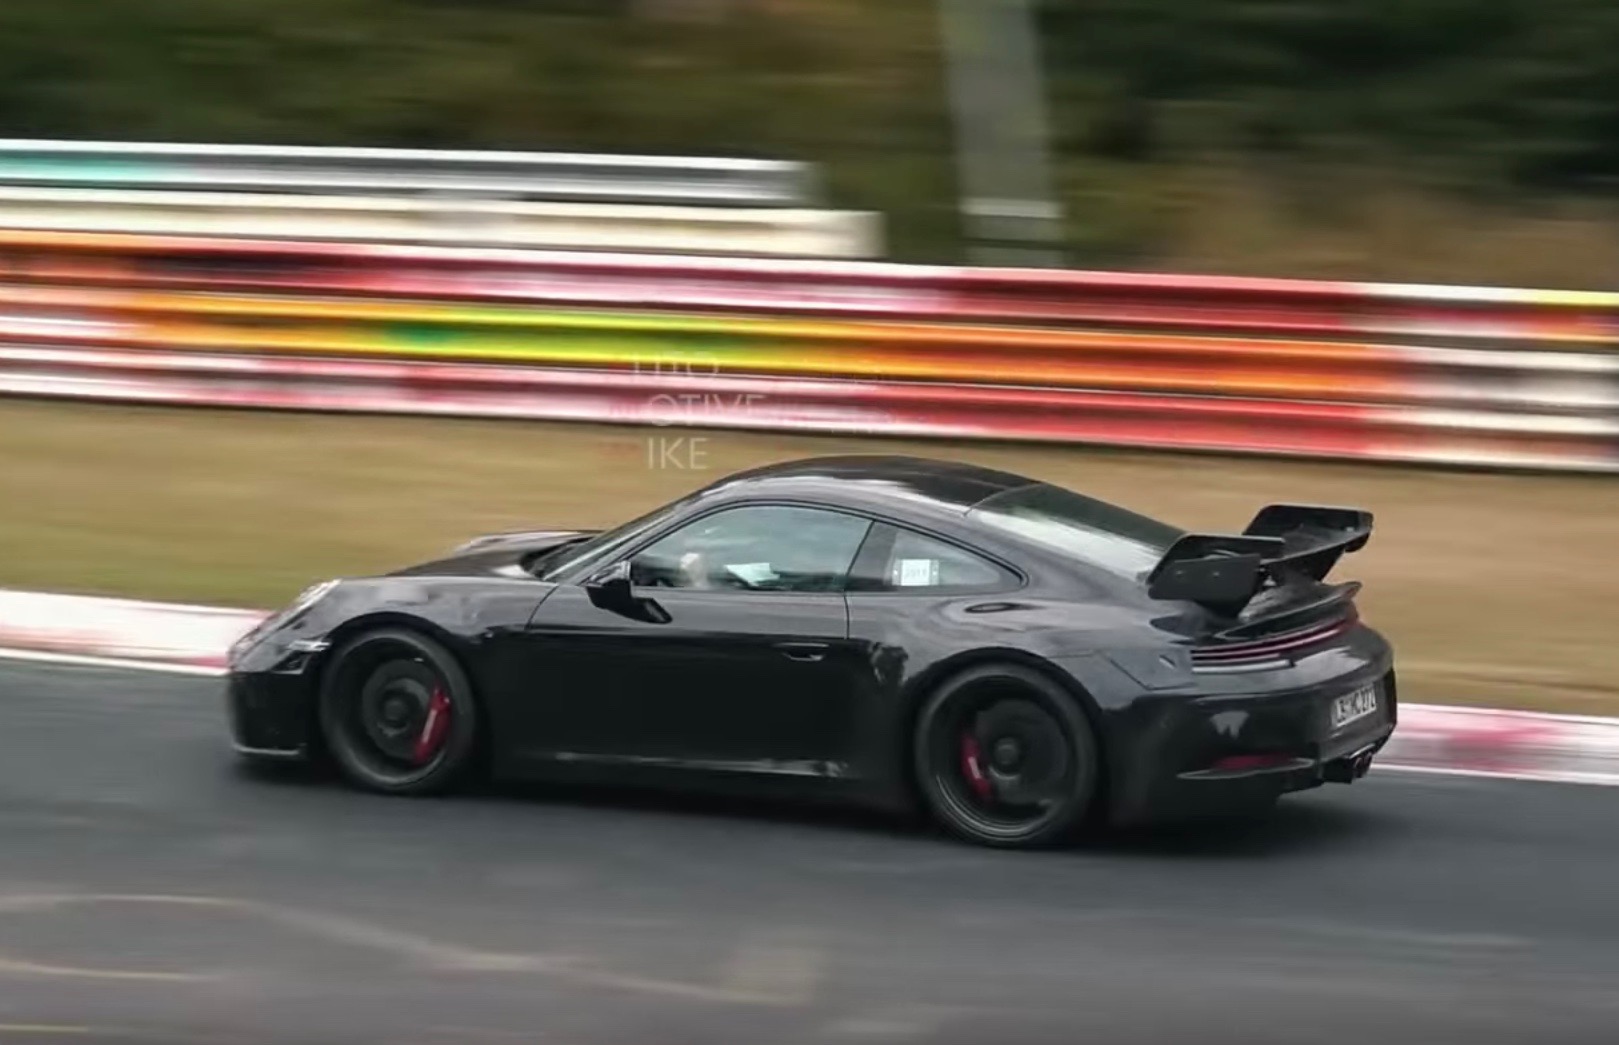 2020 Porsche 911 GT3 ‘992’ spotted at Nurburgring, looks fast (video)